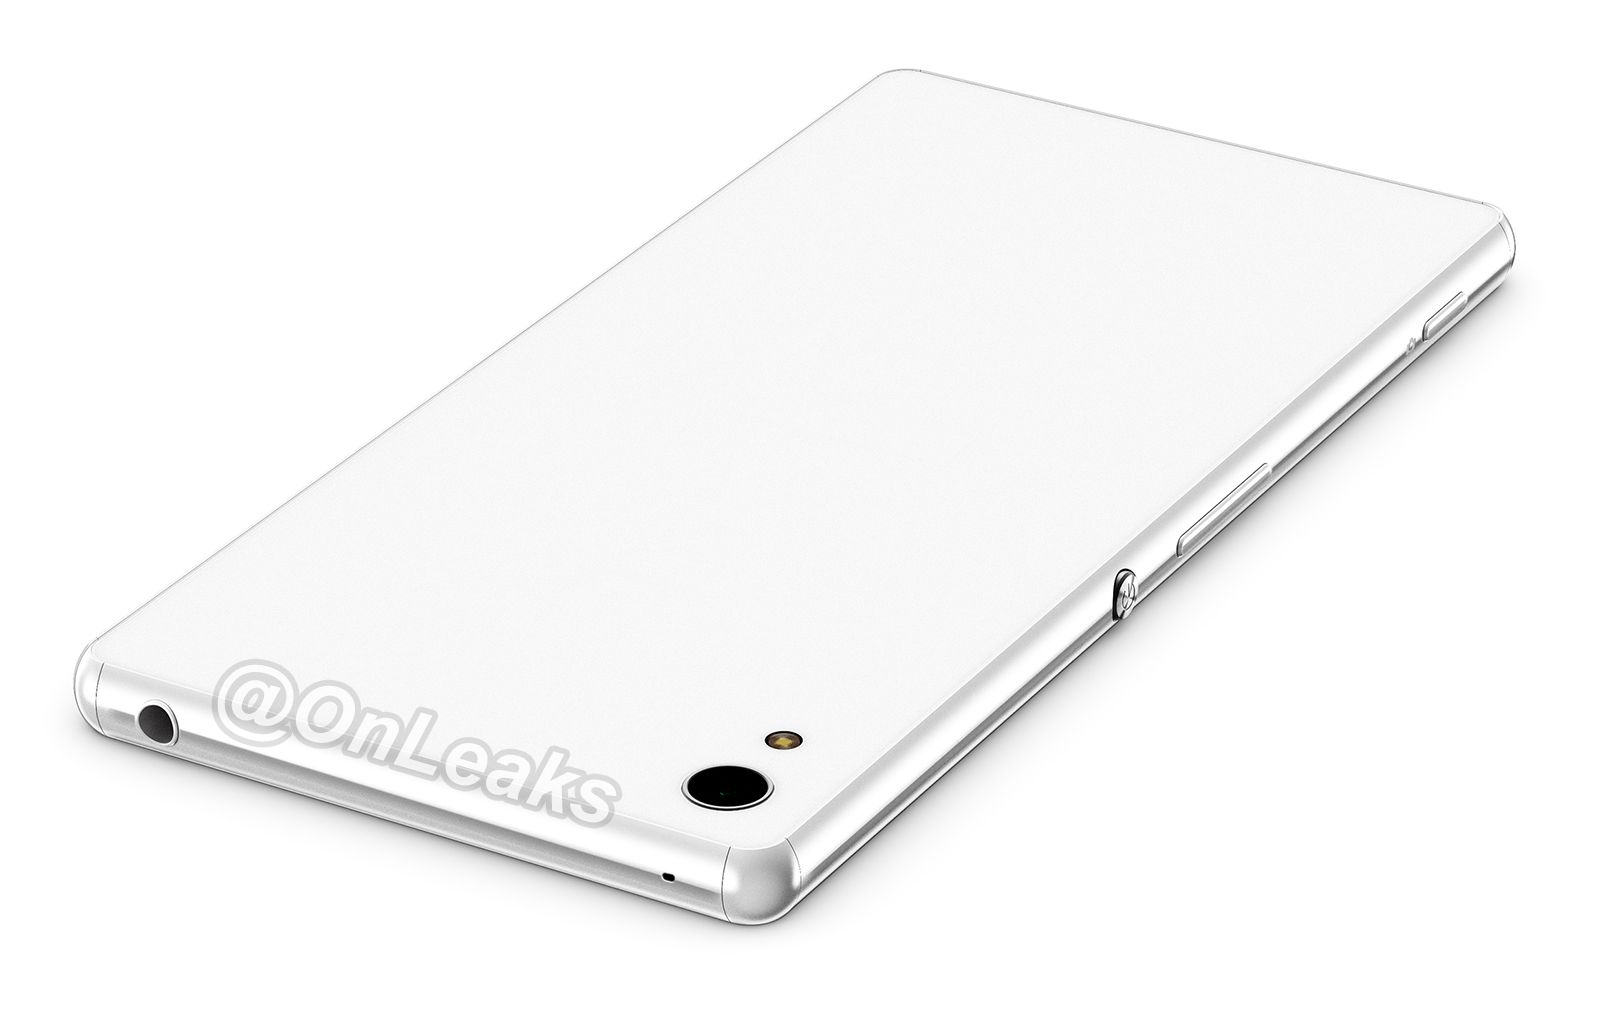 sony xperia z4 pictures reveal what sony s next flagship will look like image 4